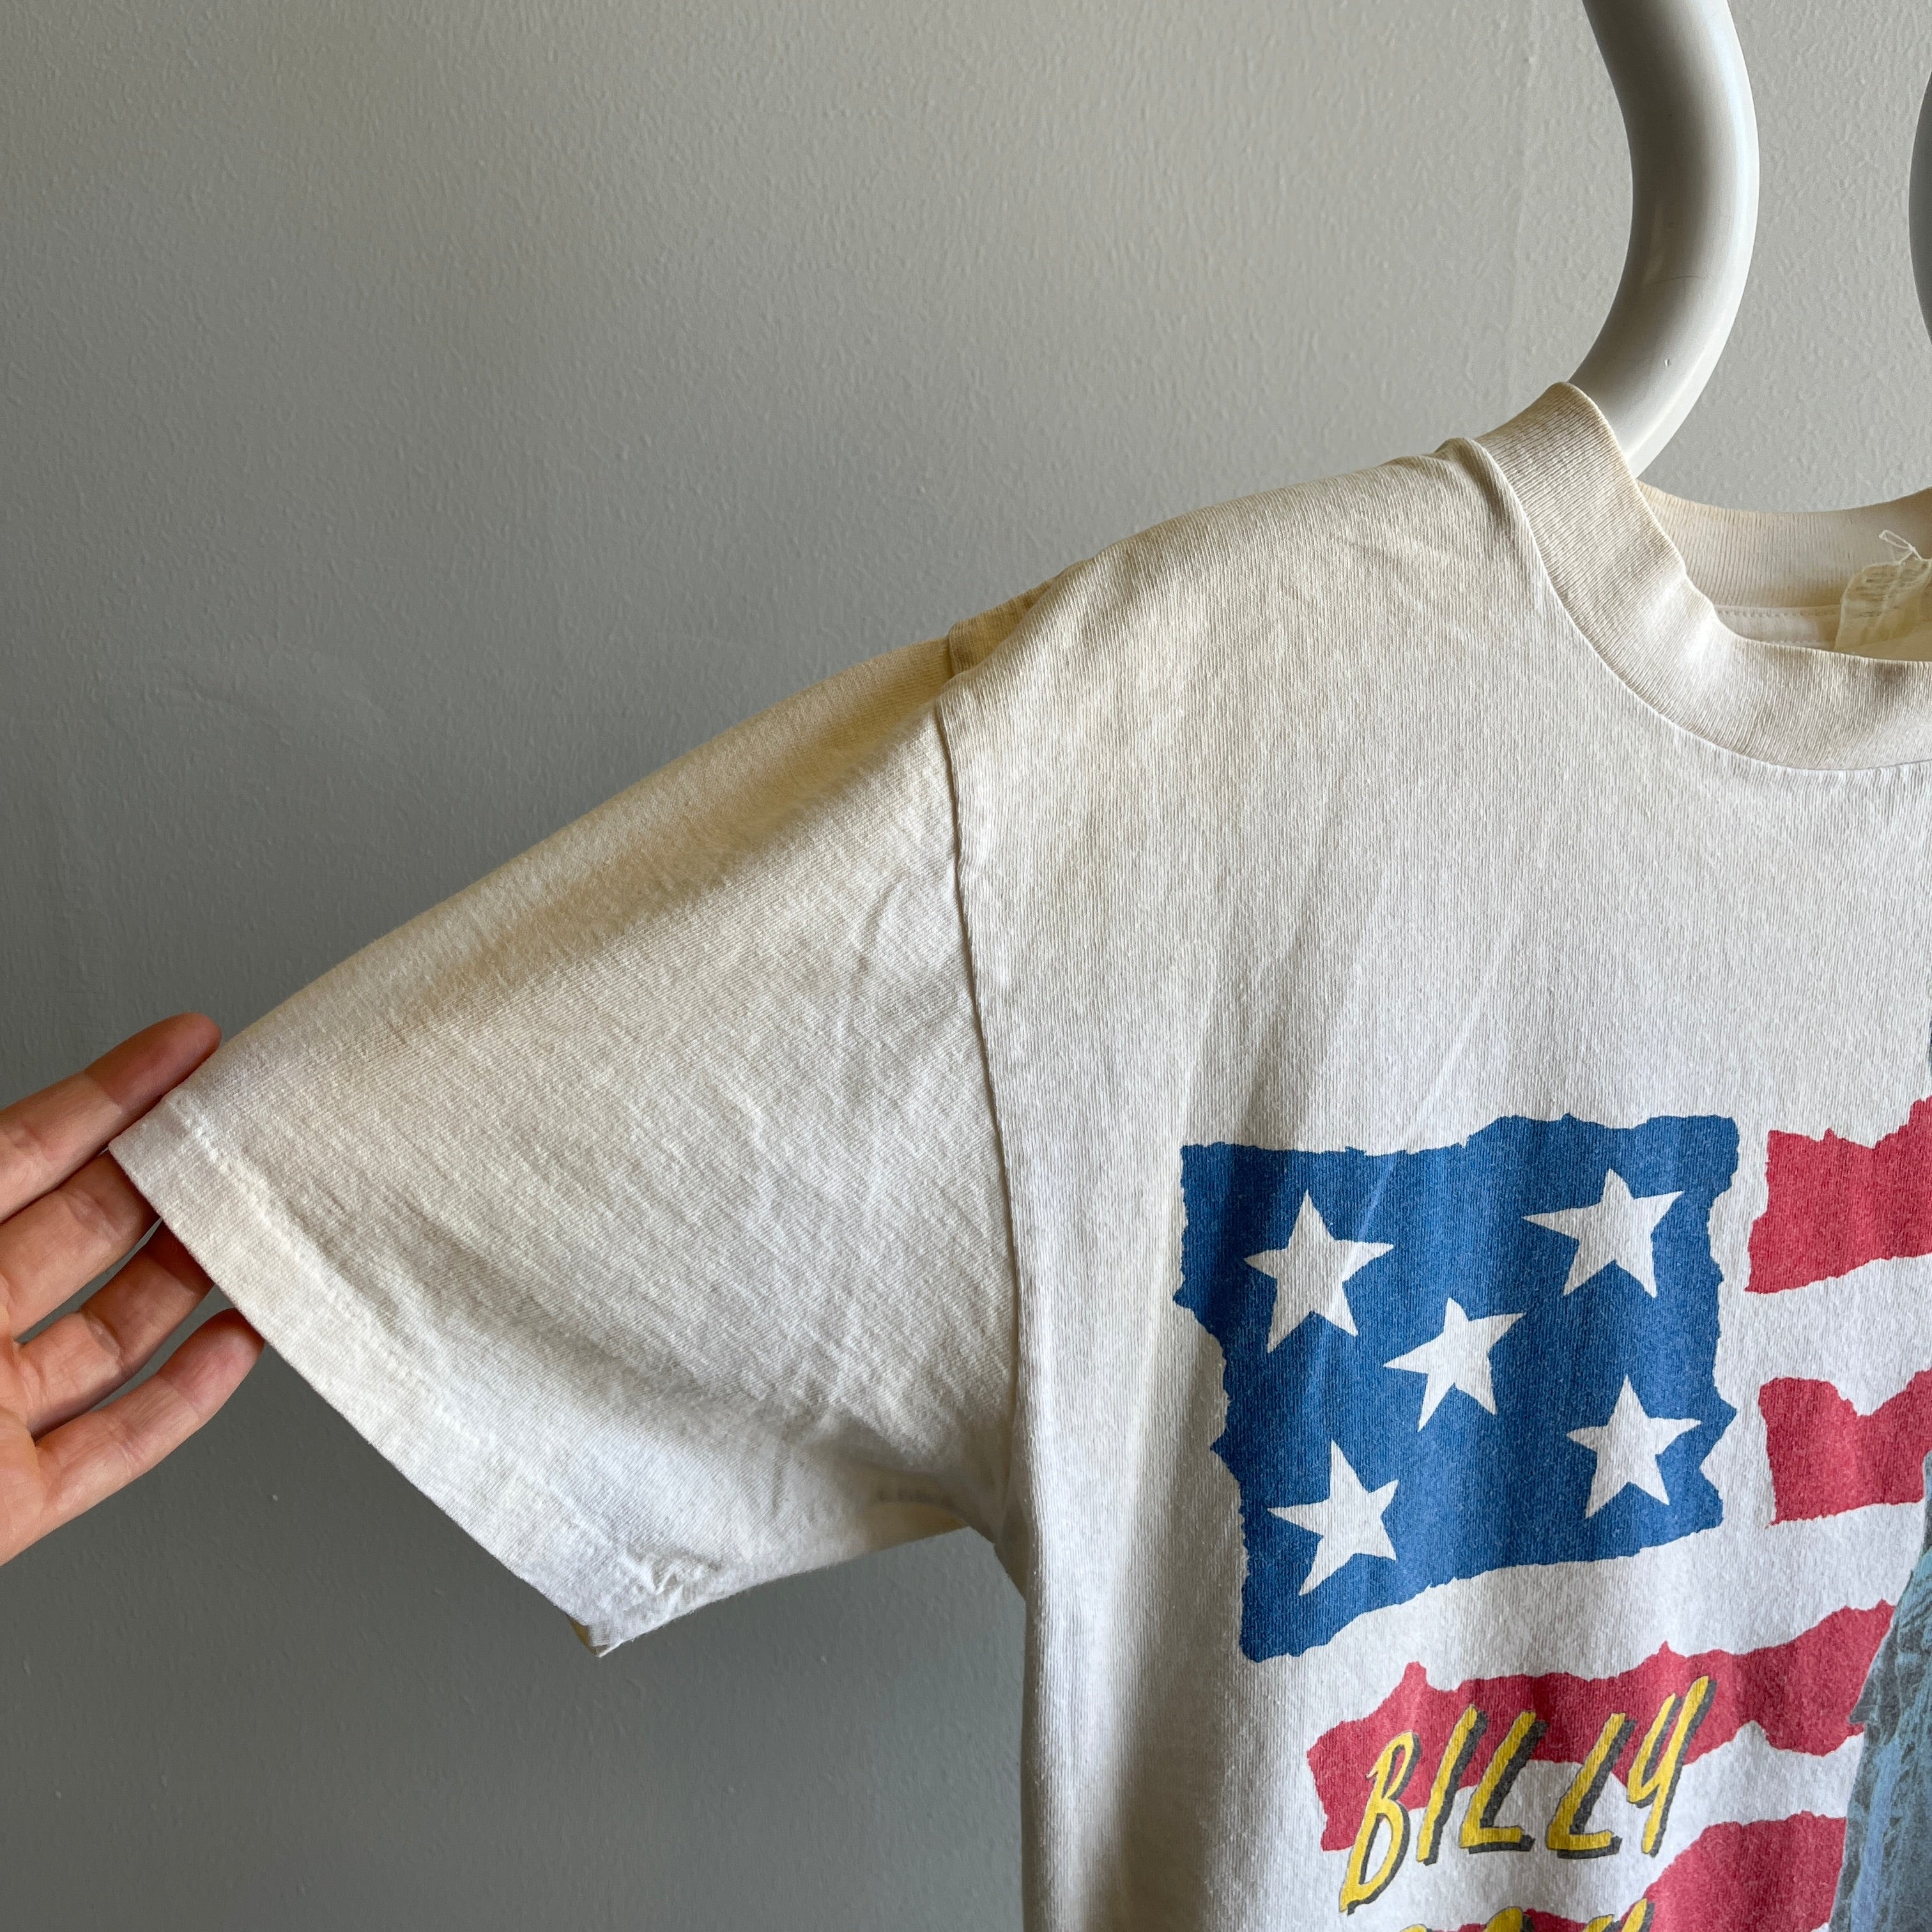 1992 Billy Ray Cyrus - Some Gave All Tour - T-Shirt